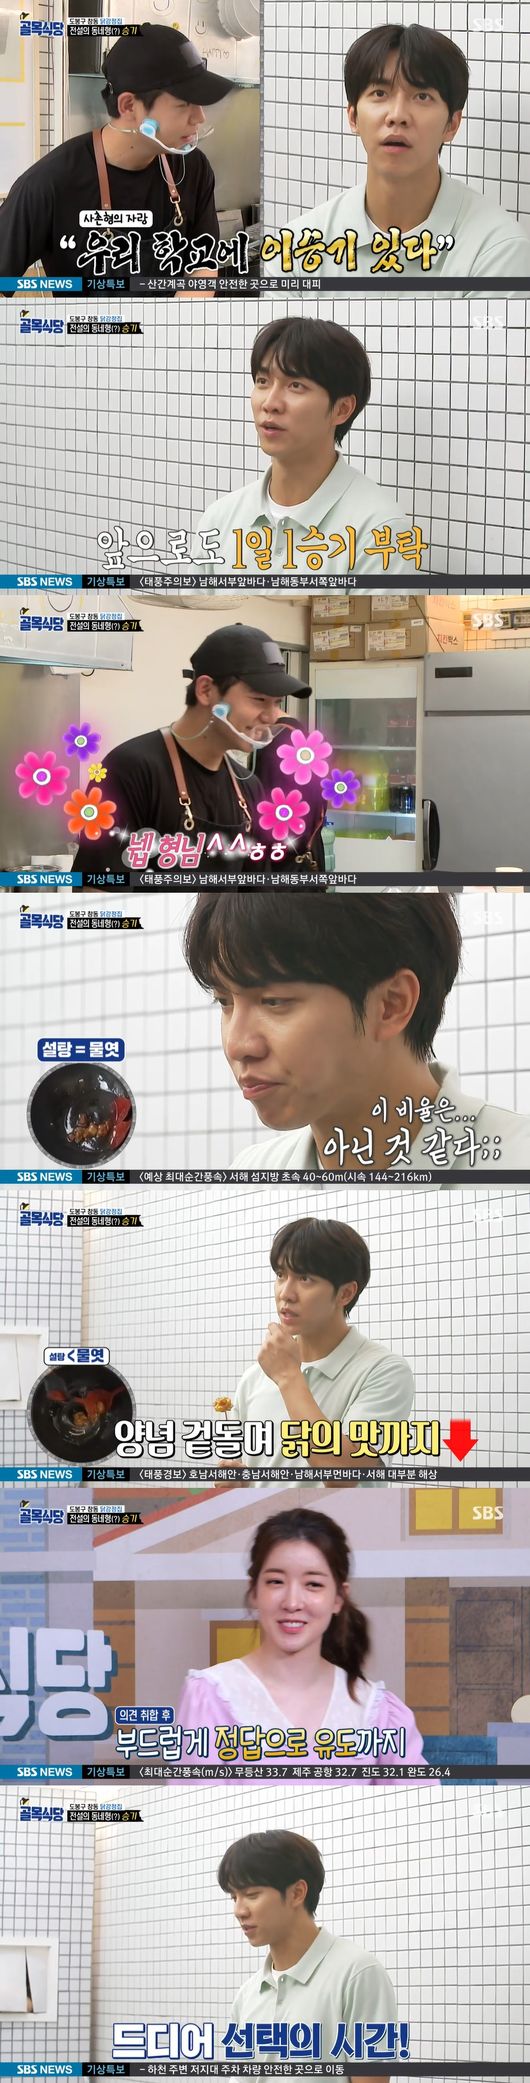 Lee Seung-gi and Cho Kyuhyun in The Alley Restaurant also played as relief pitchers to make Baek Jong-won happy.Dobong District Chang-dong alley was drawn at the SBS entertainment Baek Jong-wons The alley restaurant broadcasted on the 26th.On this day, Baek Jong-won visited the chicken gangjeong house while Dobong District Chang-dong alley was drawn.As soon as he entered, Baek Jong-won confirmed the Garlic in question and said, Do not use Garlic, because you smell sour Garlic pickles.I did not even look through the Garlic bag, it is a play and acting if I do not keep the basics, said Baek Jong-won, who emphasized that there is no meaning if I do not try to do it even if I have a chance of a lifetime.I was more strongly motivated by the hope that the novice bosses would solidify the basics.In addition to Garlic, he was the president of a chicken gang house, which he had a lot to supplement.Baek Jong-won told the chicken gangjeong house, If you prepare, I will send a difficult brother from this neighborhood.Next, a pizza restaurant with NO delivery was drawn. Cho Kyuhyun came back as a pizza maker in the situation room, and finally the pizza was completed and the tuna pizza was sampled first.Cho Kyuhyun said that toppings are new and I do not think it is a taste that is impressed. Then he heard the price and said, It is a good pizza.I do not feel the taste of red pepper oil, but I do not feel the taste, said Cho Kyuhyun, who added, I usually use red pepper oil a lot, and I do not feel more special because red pepper oil is in.Baek Jong-won and MCs also looked at it on the monitor, saying, There is a lot of toppings.Baek Jong-won called Cho Kyuhyun and said, I am looking at it accurately. In the appearance of magically finding the balance of taste with appropriate toppings, Baek Jong-won also expressed his pride that the balance of toppings and the harmony of toppings are important.Lee Seung-gi then appeared in surprise, and Baek Jong-won asked for feedback as he raised the flag of the two presidents who died.I asked for some advice and affectionate advice, and I arrived at the chicken gangjeong house and asked me carefully from the target audience.Lee Seung-gi, who was praised for I came to see the size and fry coating, relaxed the bosses; it made everyone admire with a genuine Maseong talk skill.Lee Seung-gi quickly turned the topic to the dead boss and continued the friendly atmosphere with the story of the neighborhood.Lee Seung-gis friendly consideration, the president, melted his heart, I boasted that our school had Lee Seung-gi, he naturally focused on cooking.Lee Seung-gi, the president who was relaxed because of Lee Seung-gi, decided to taste three different chicken gangsters with blind tests.Lee Seung-gi, who tasted carefully one by one, chose a sugar ratio higher than starch syrup, and the president, who was opposed, also listened.MCs who saw this said, I look at the typical student chairman style and a few opinions, he said, a steam leader who gently induces opinions to the right answer after collecting opinions.Lee Seung-gi said, I am honored to be able to develop together, once I accept the opinion of Mr. Baek Jong-won, make my own idea. He expressed his encouragement with a warm heart and heart like his senior and local brother.He delivered a 100,000 won cheering car and said, Buy more materials and practice more. He left a commemorative photo with Chang-dong Brothers.MCs who saw this said, I hope that warm encouragement will be completed with energy, and the food completion has been further improved by presenting specific opinions.The alley restaurant captures the broadcast screen